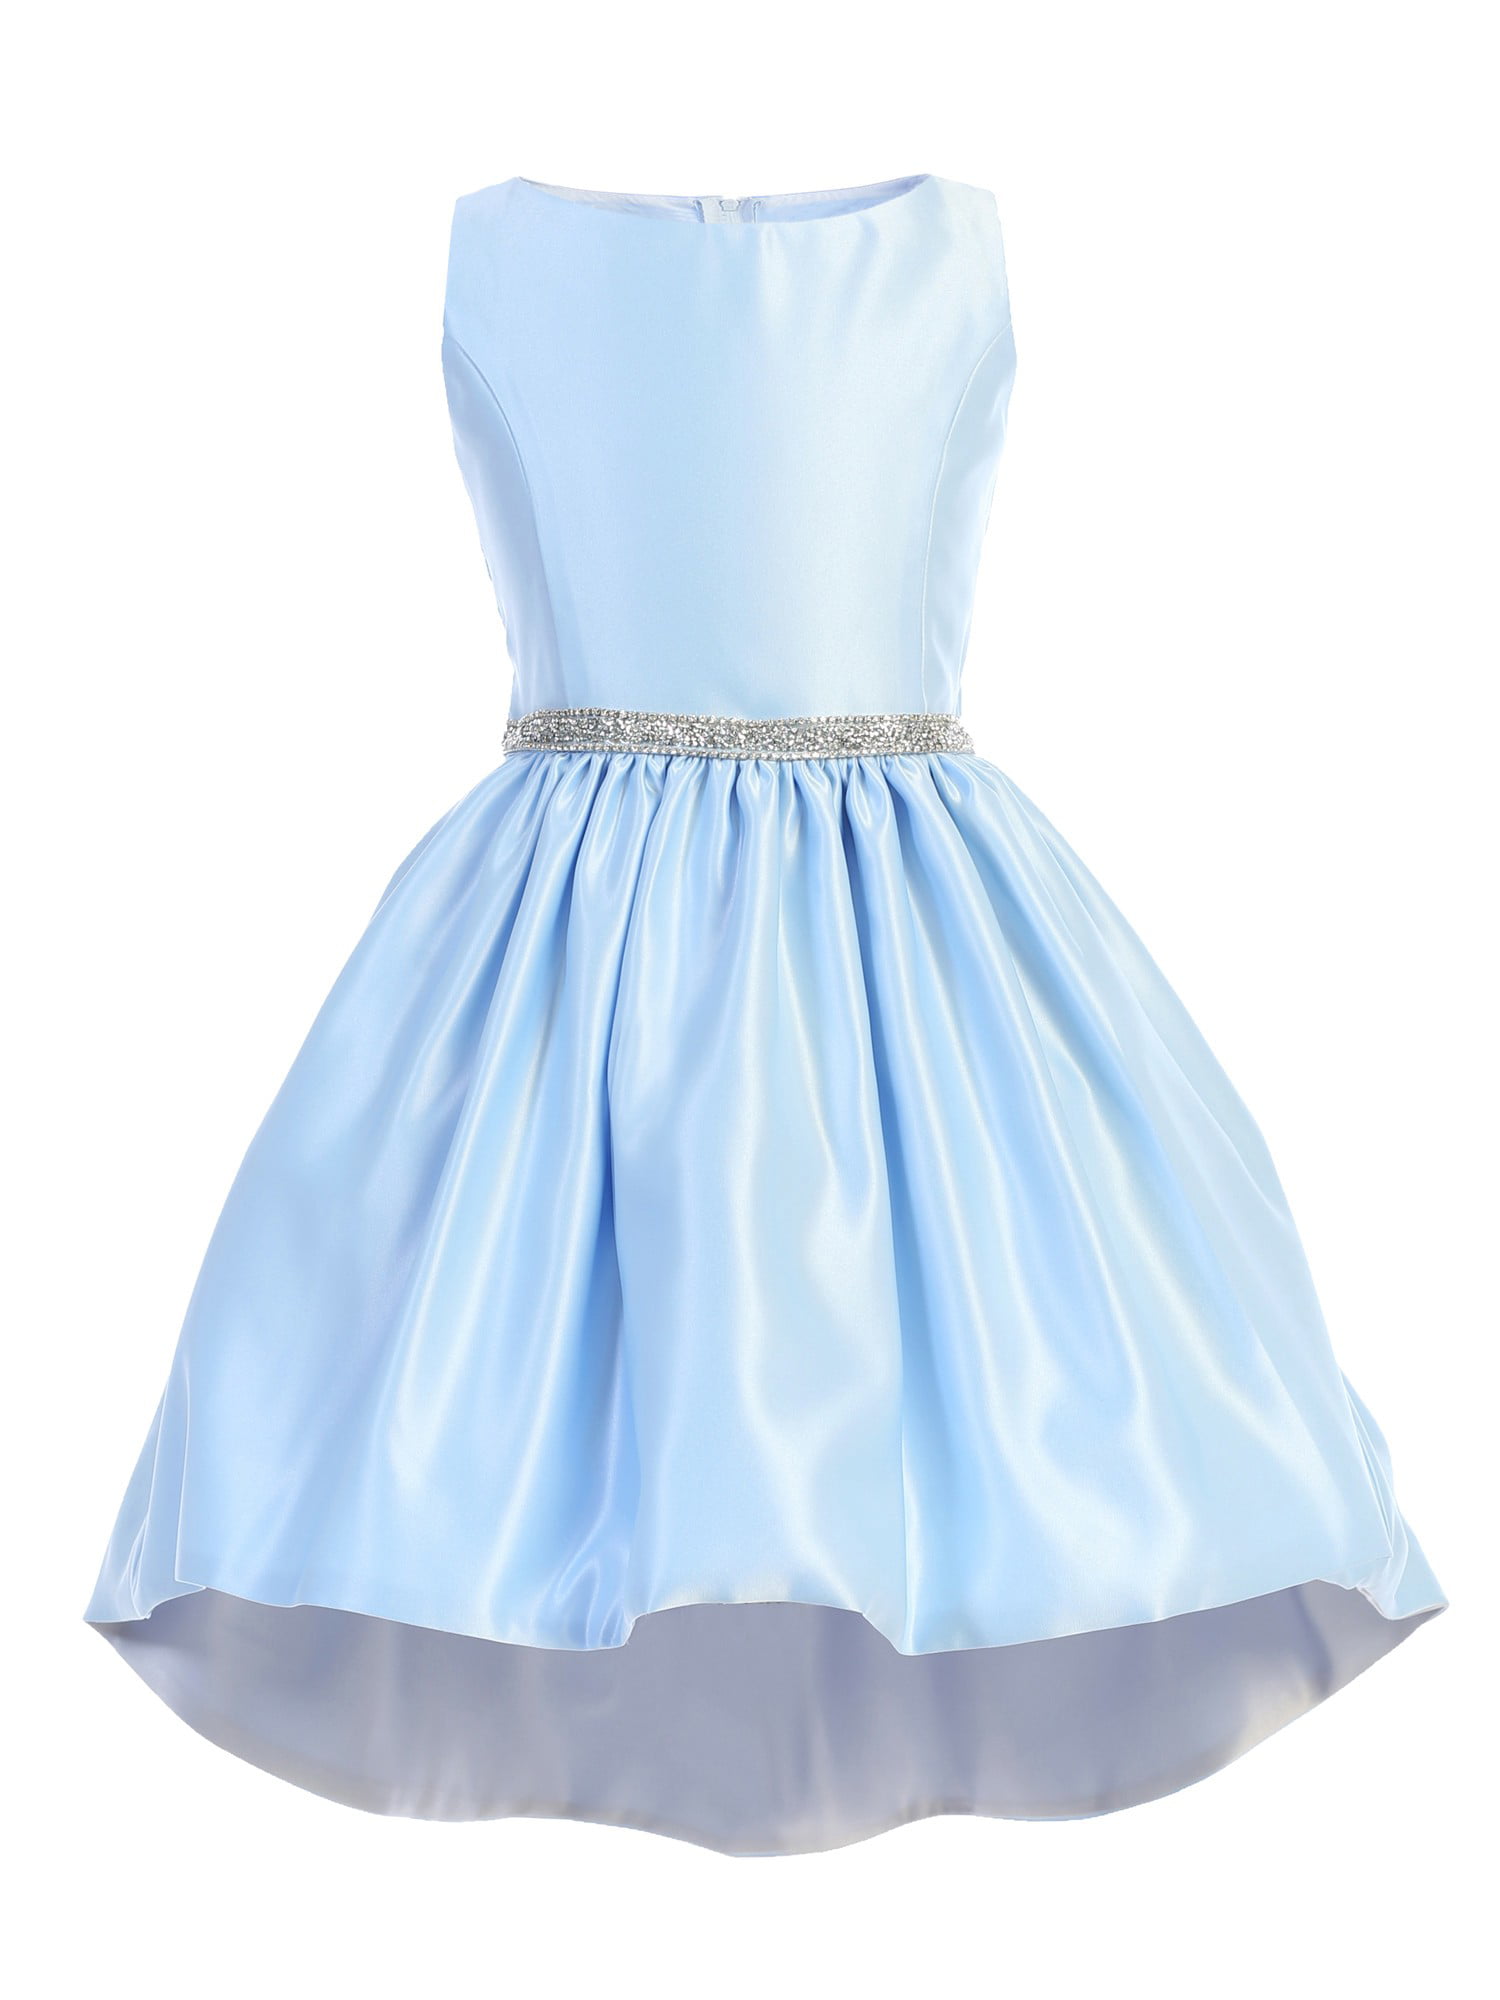 Kids special occasion dresses